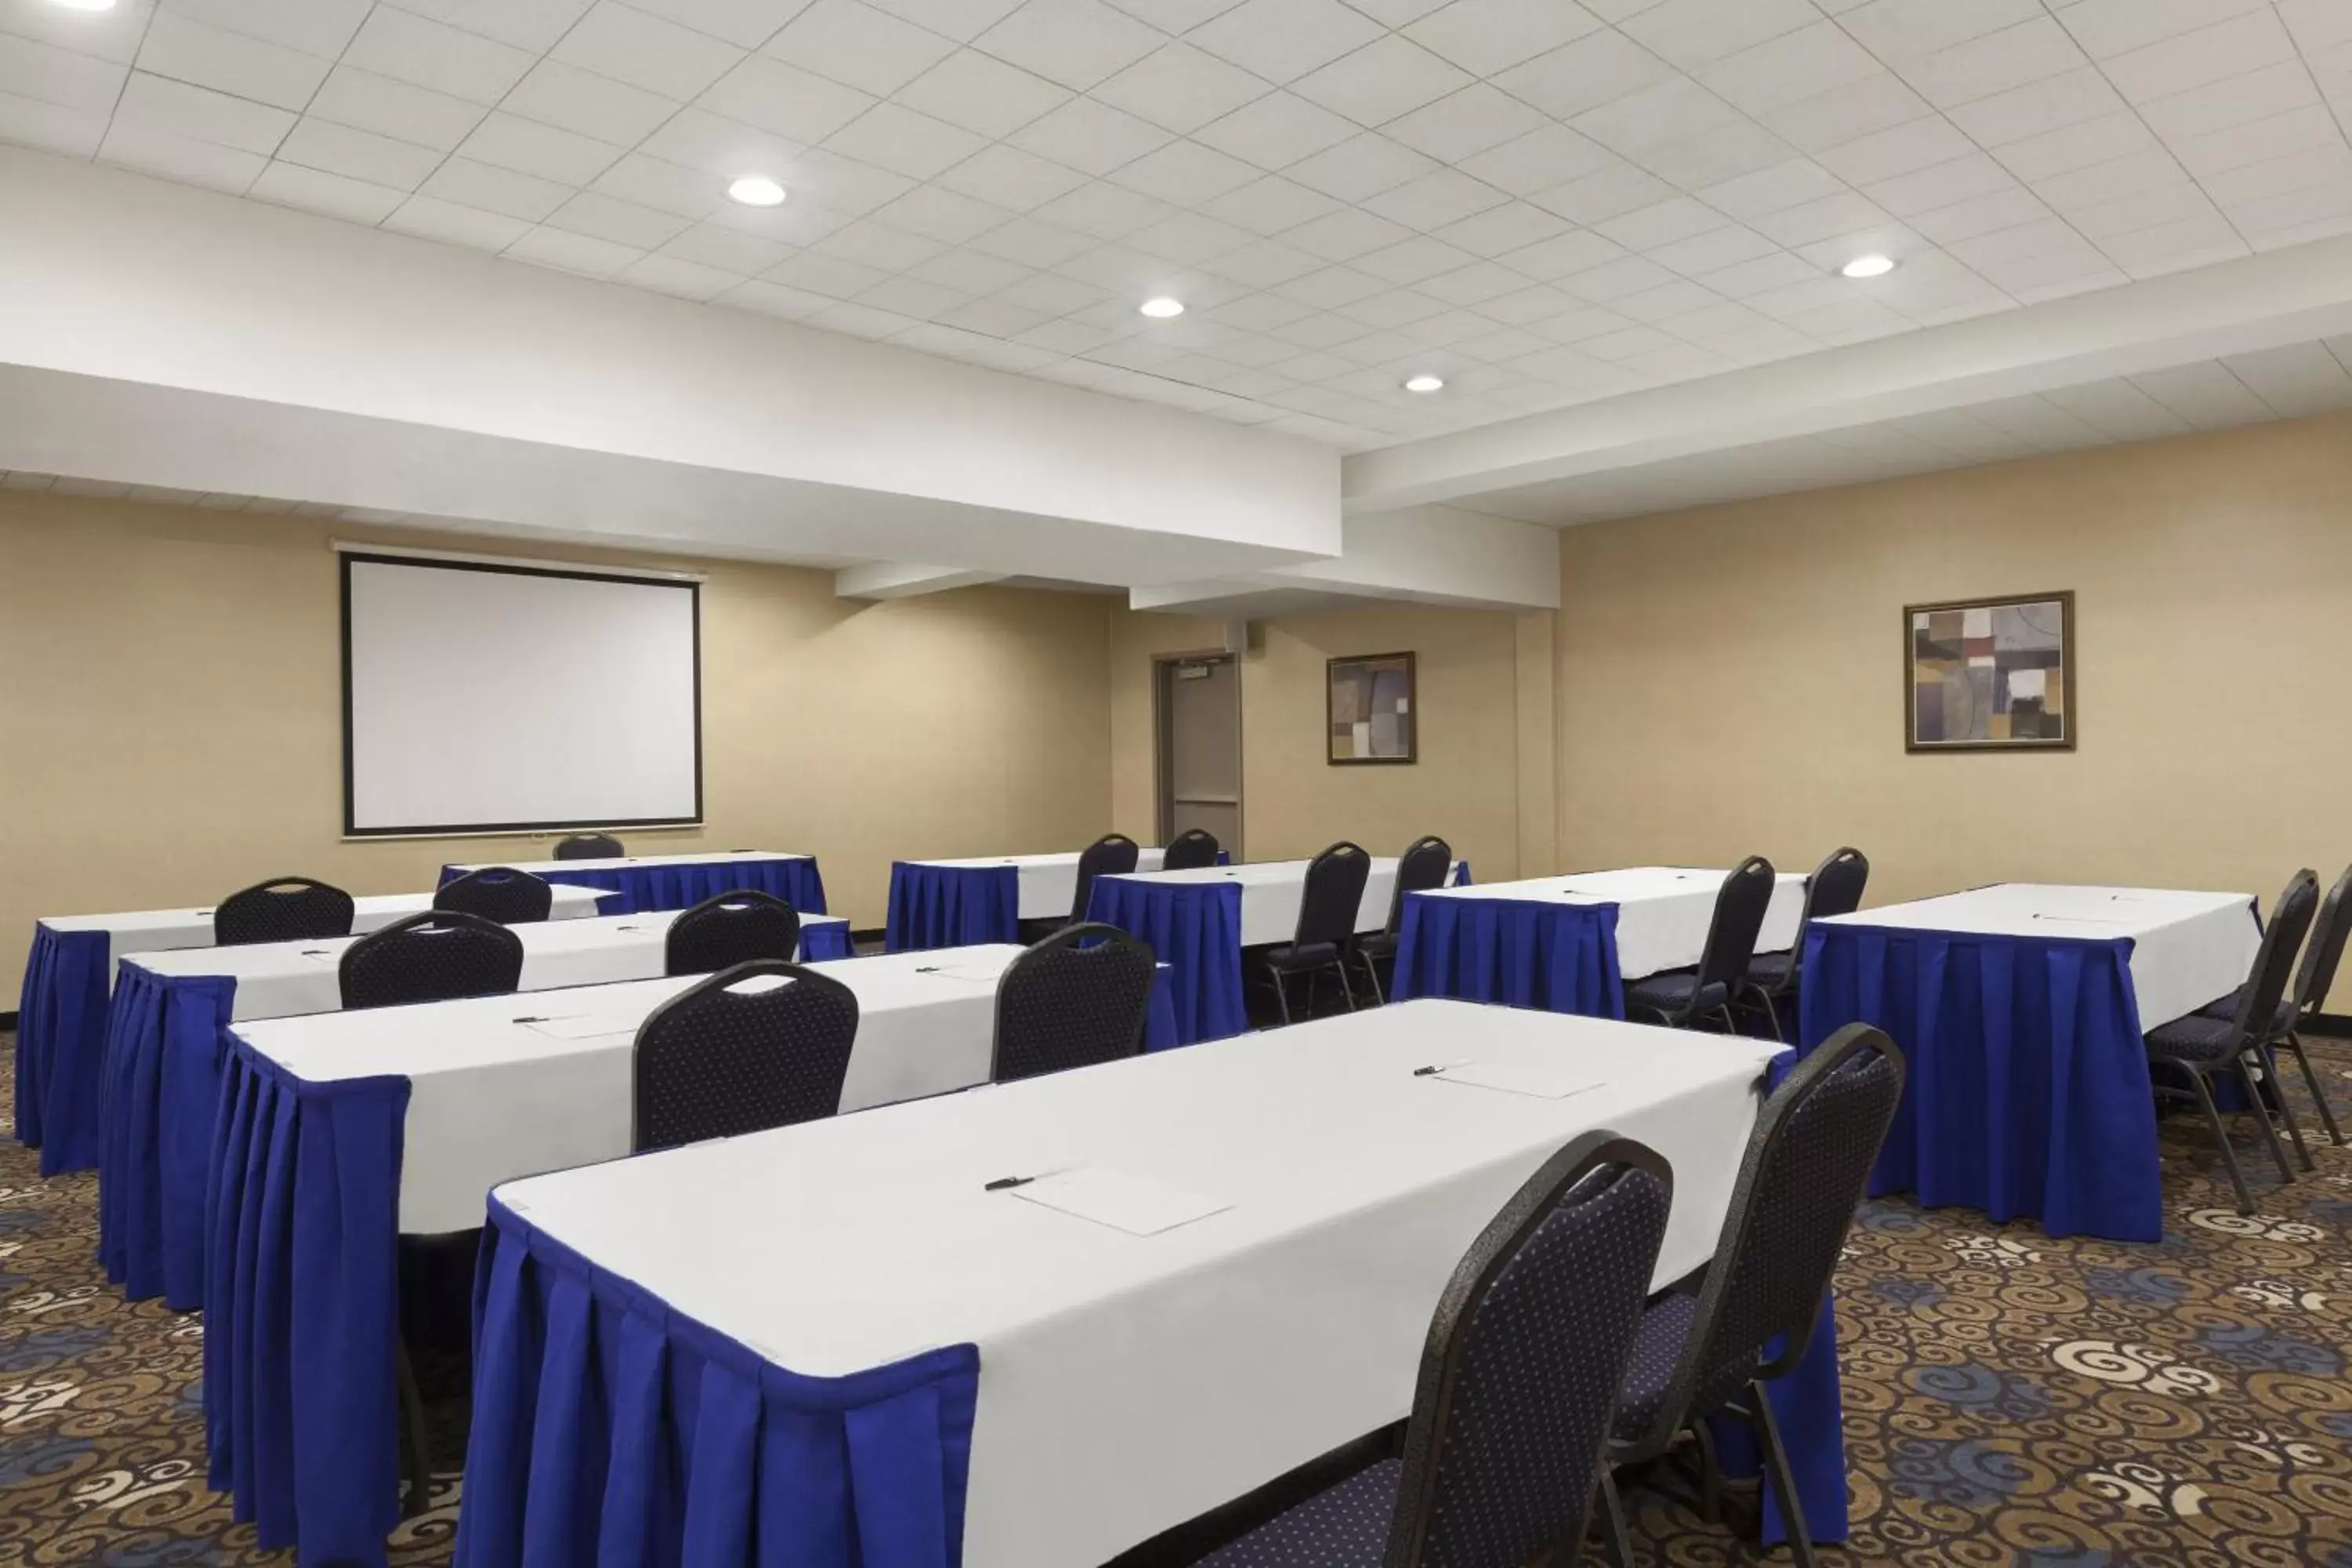 Banquet/Function facilities, Business Area/Conference Room in Country Inn & Suites by Radisson, San Jose International Airport, CA